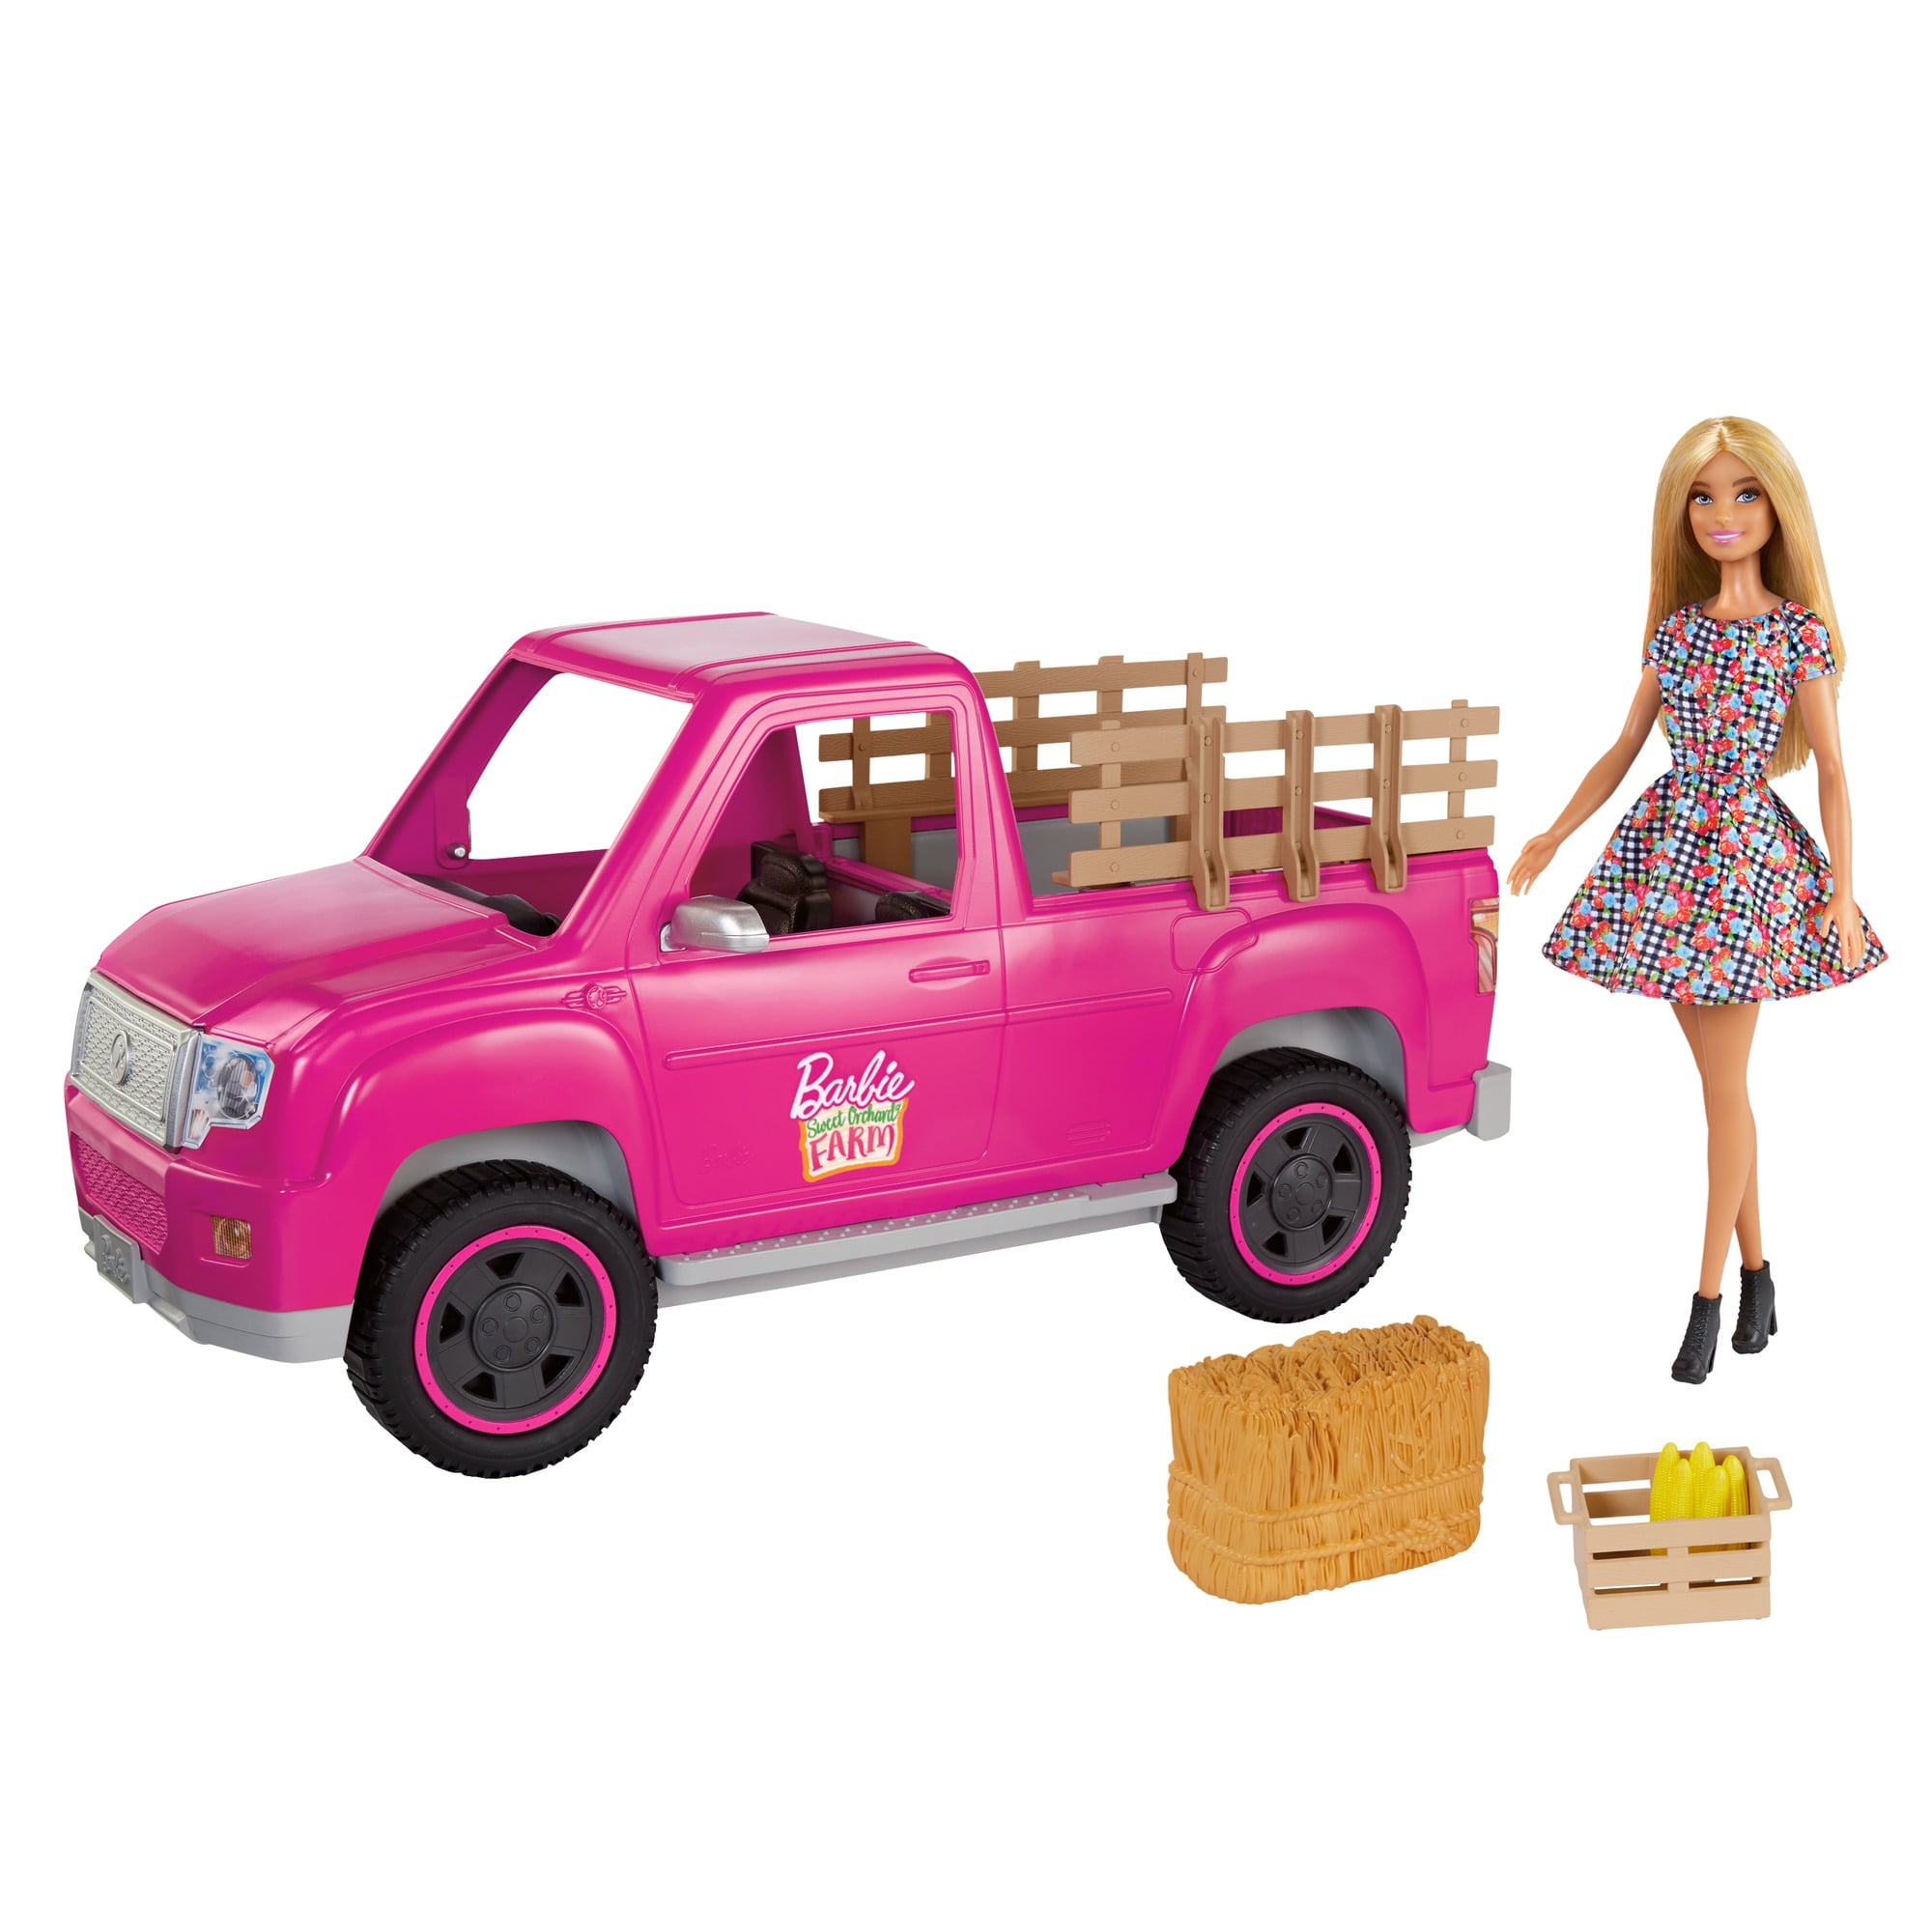 Barbie Loves The Ocean Beach Shack Playset, Made From Recycled 